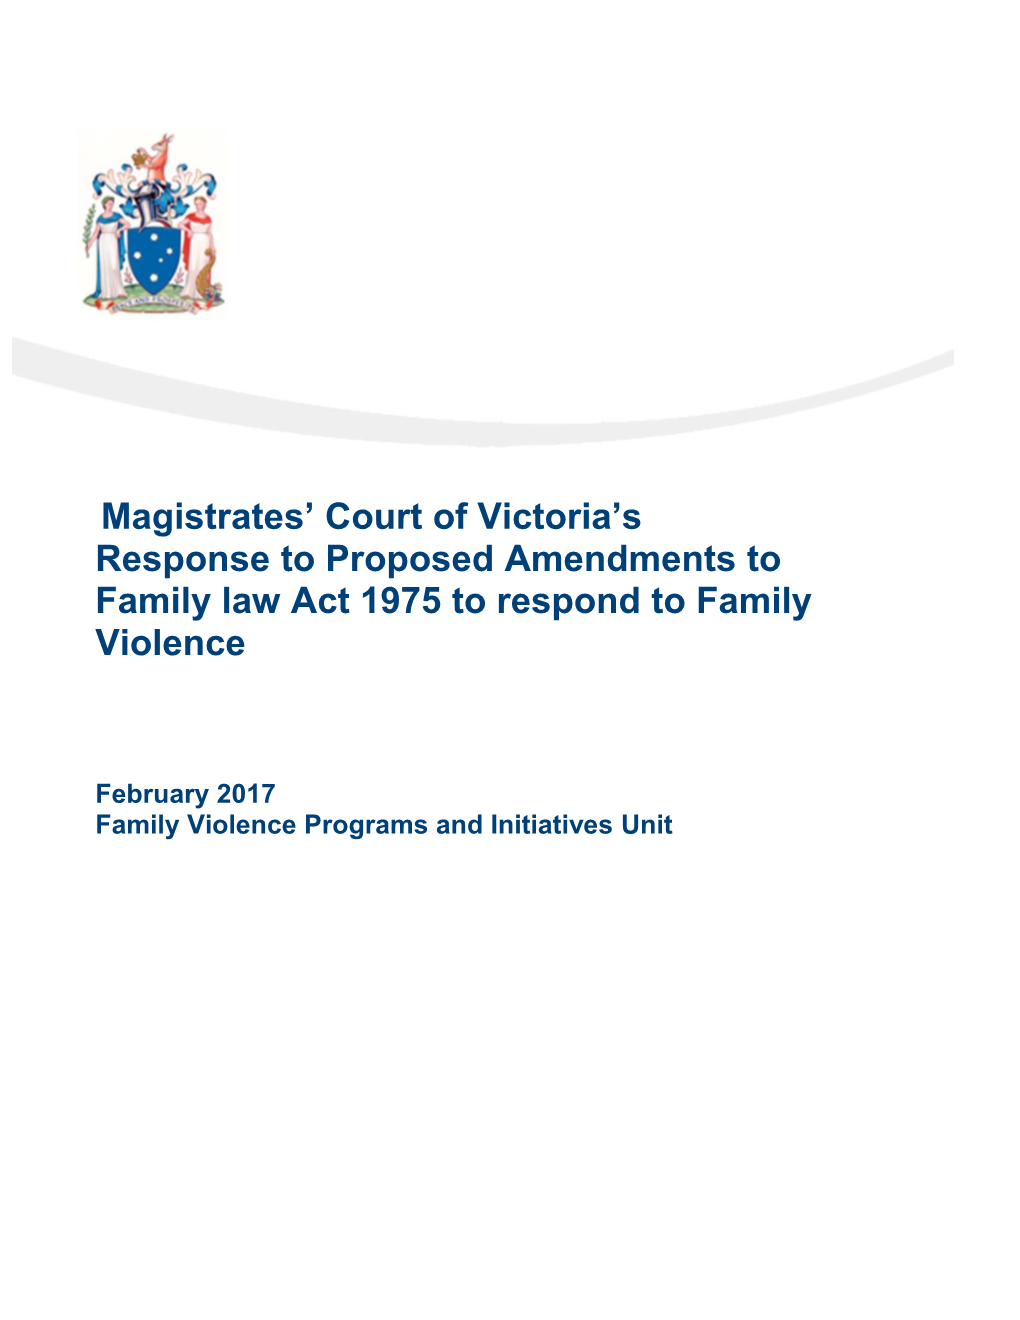 Submission - Magistrates Court of Victoria